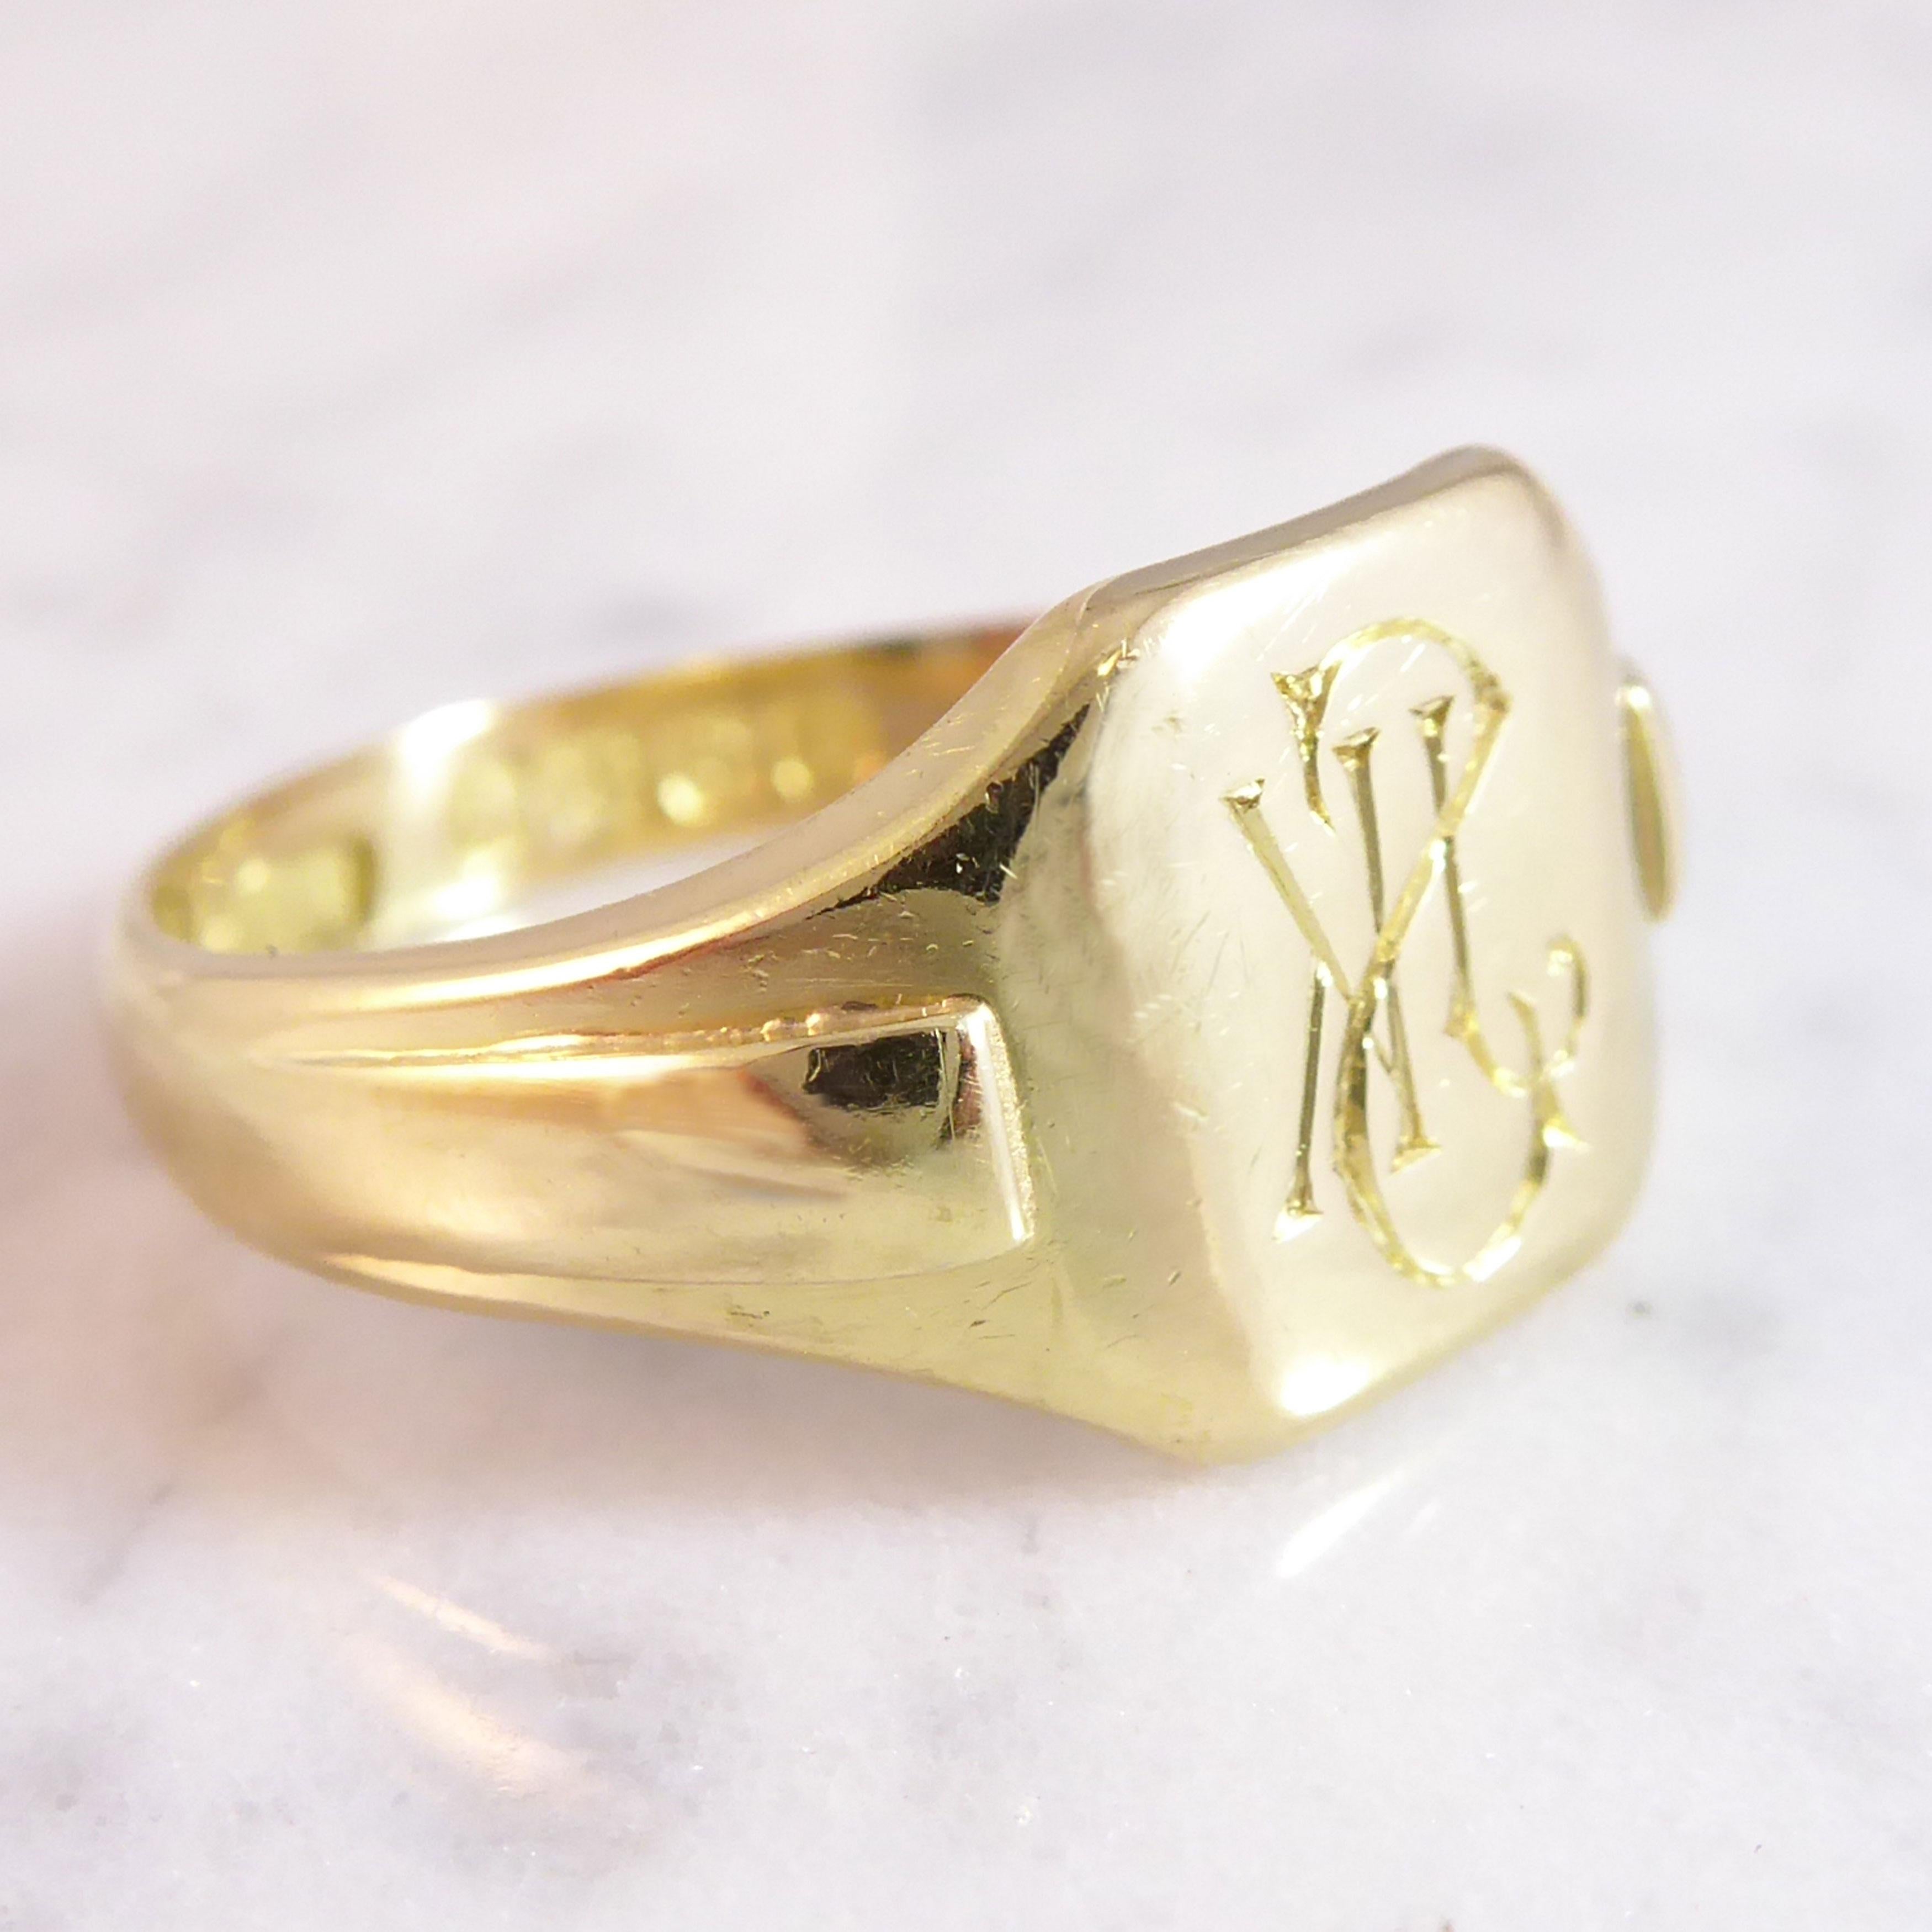 Wonderful quality vintage gold signet ring.  The top is an overall square shape, measuring approx. 0.32